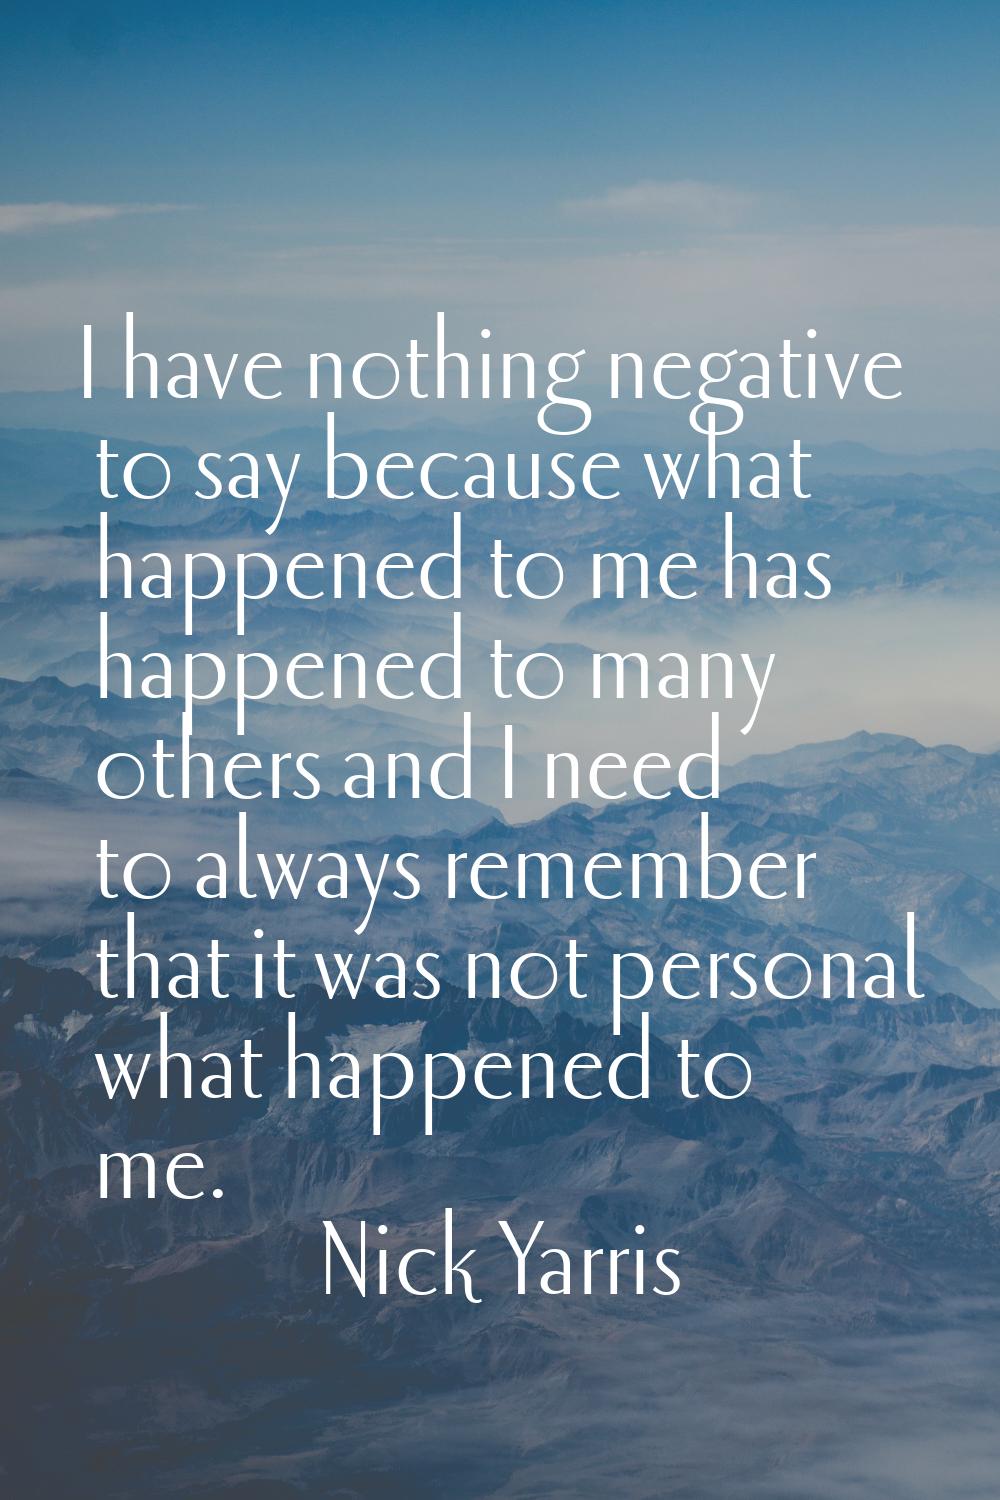 I have nothing negative to say because what happened to me has happened to many others and I need t